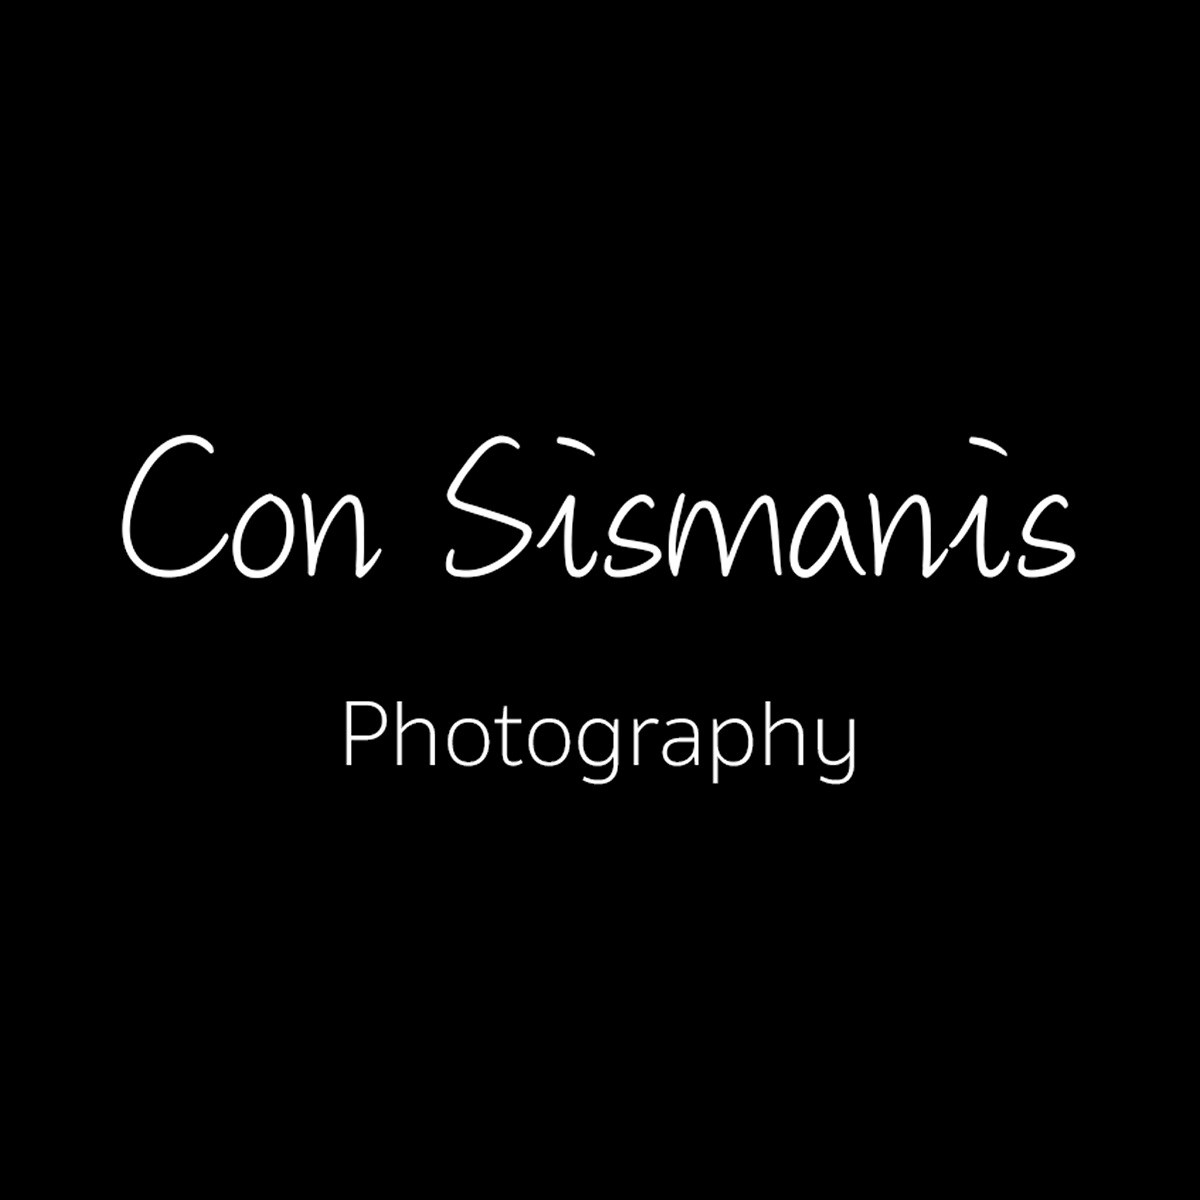 Con Sismanis Photography As Seen In The Block